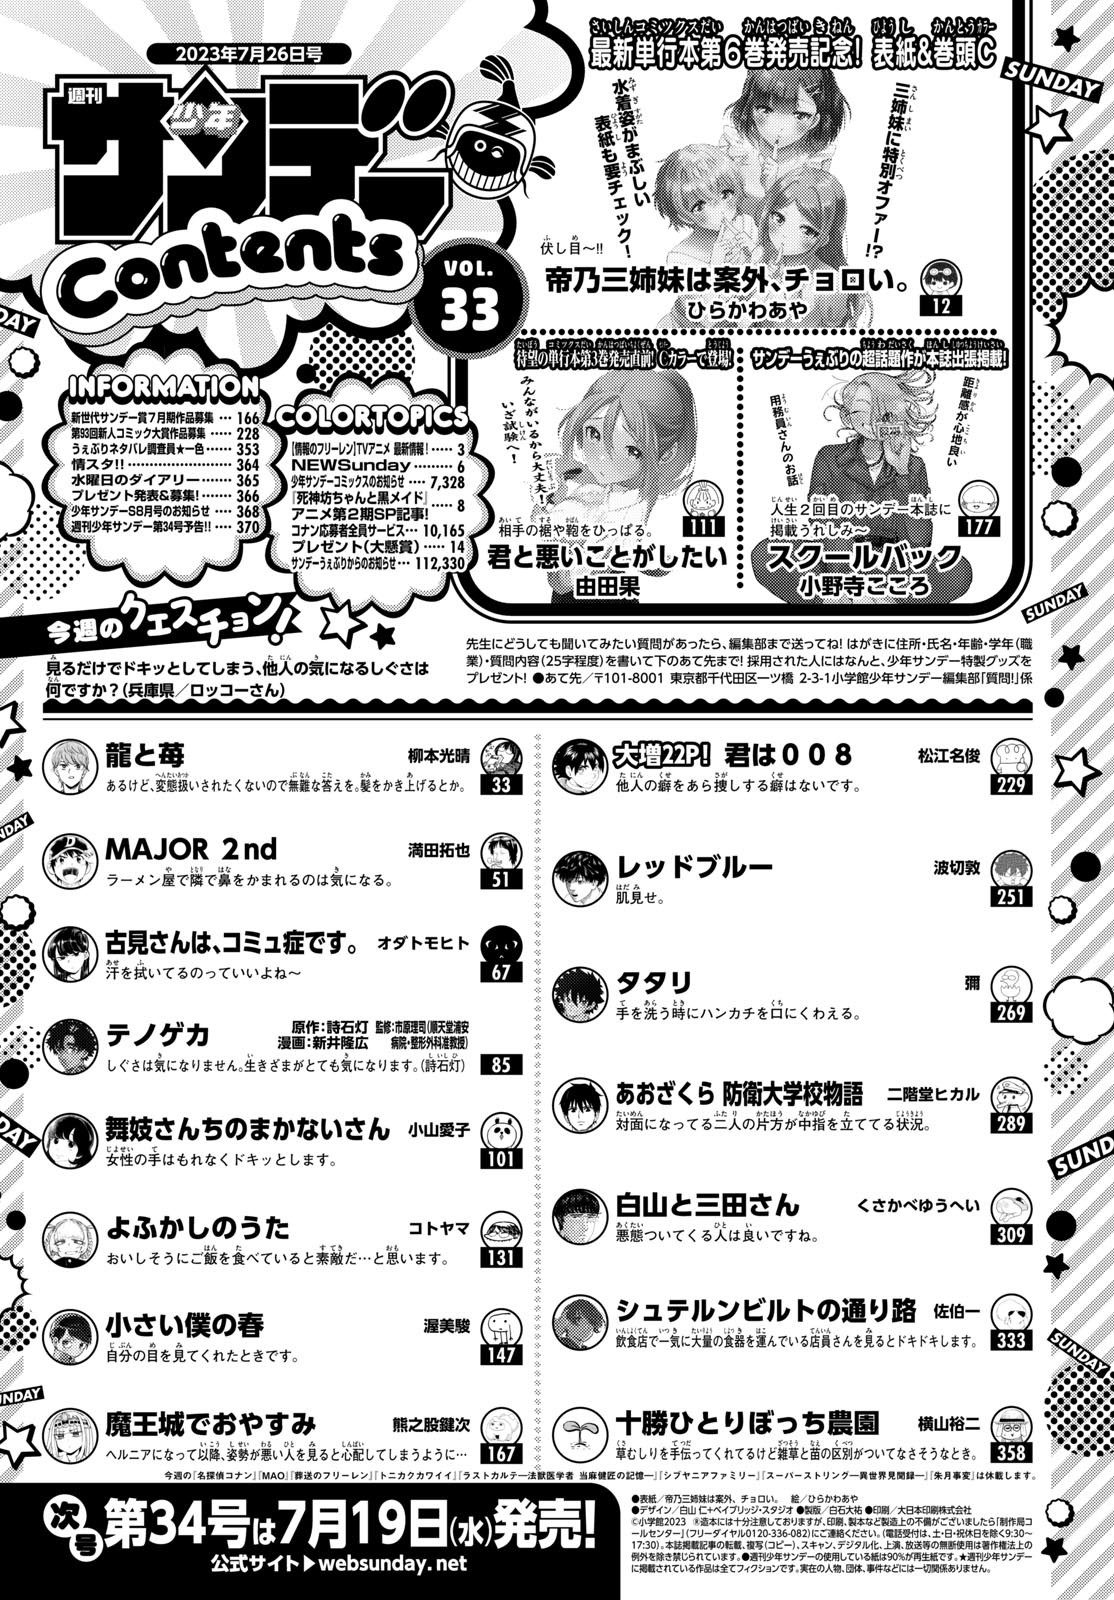 Weekly Shōnen Sunday - 週刊少年サンデー - Chapter 2023-33 - Page 2